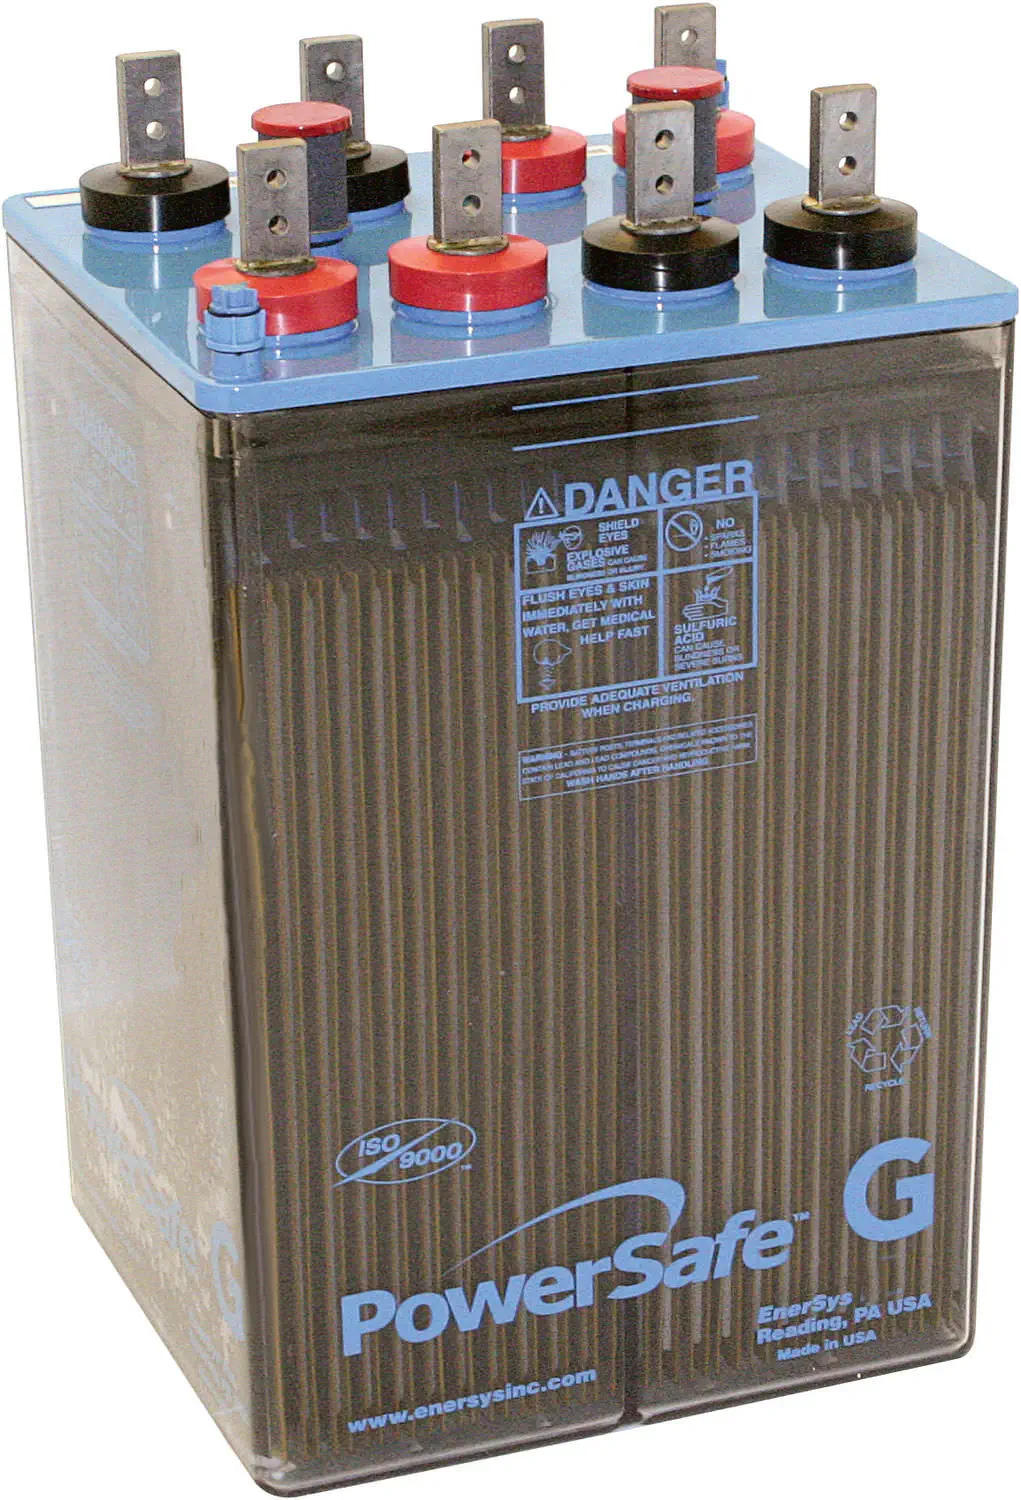 EnerSys PowerSafe 2GN-19